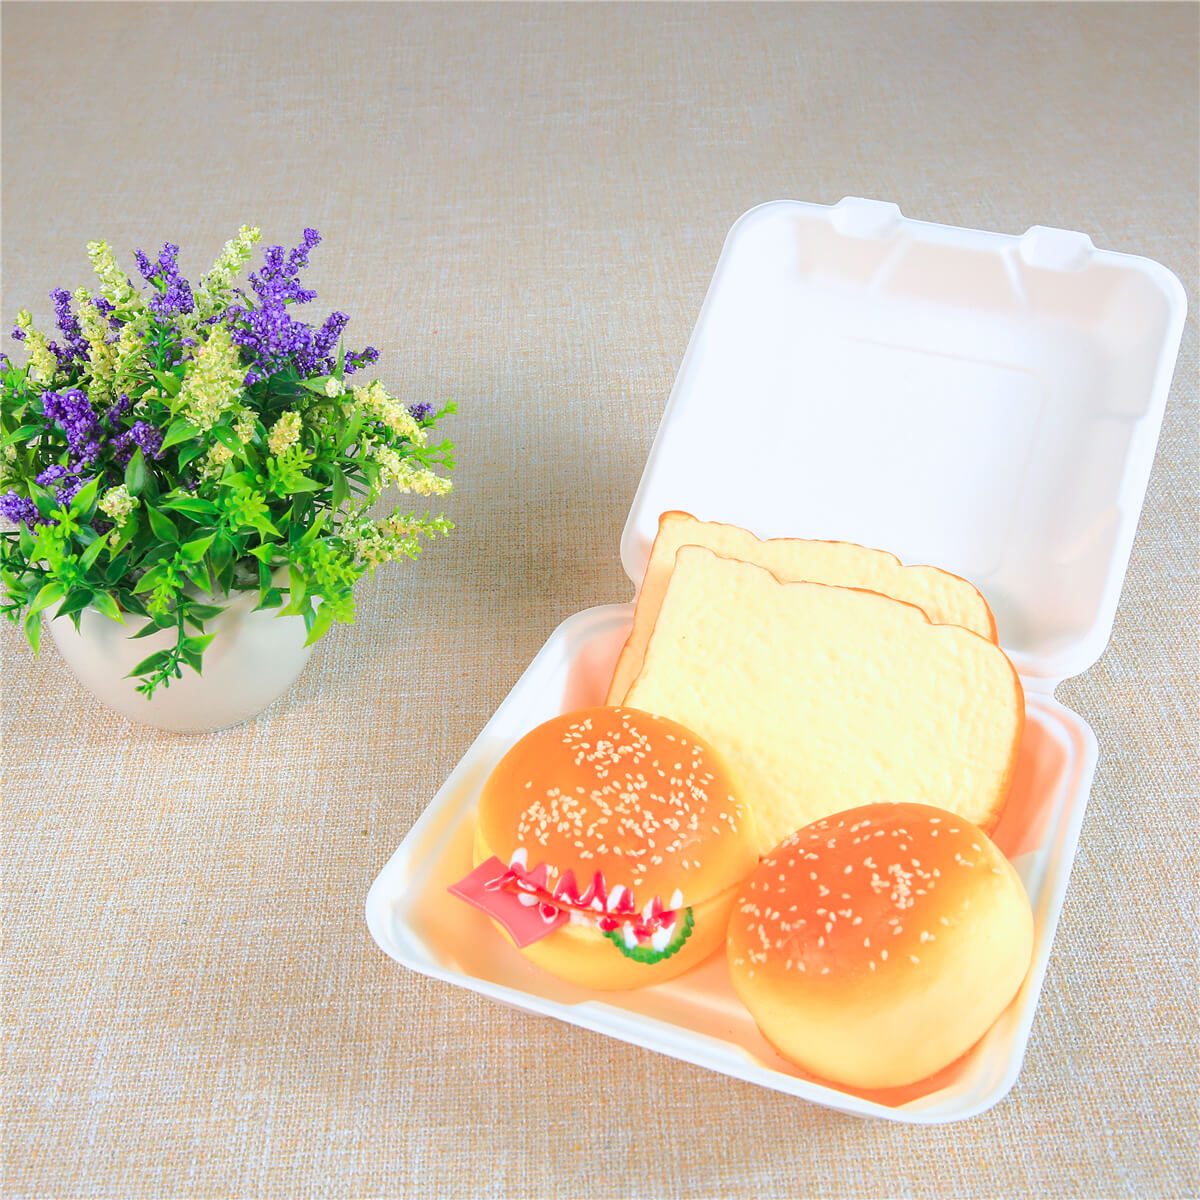 food packaging container organic food food containers with lids attached